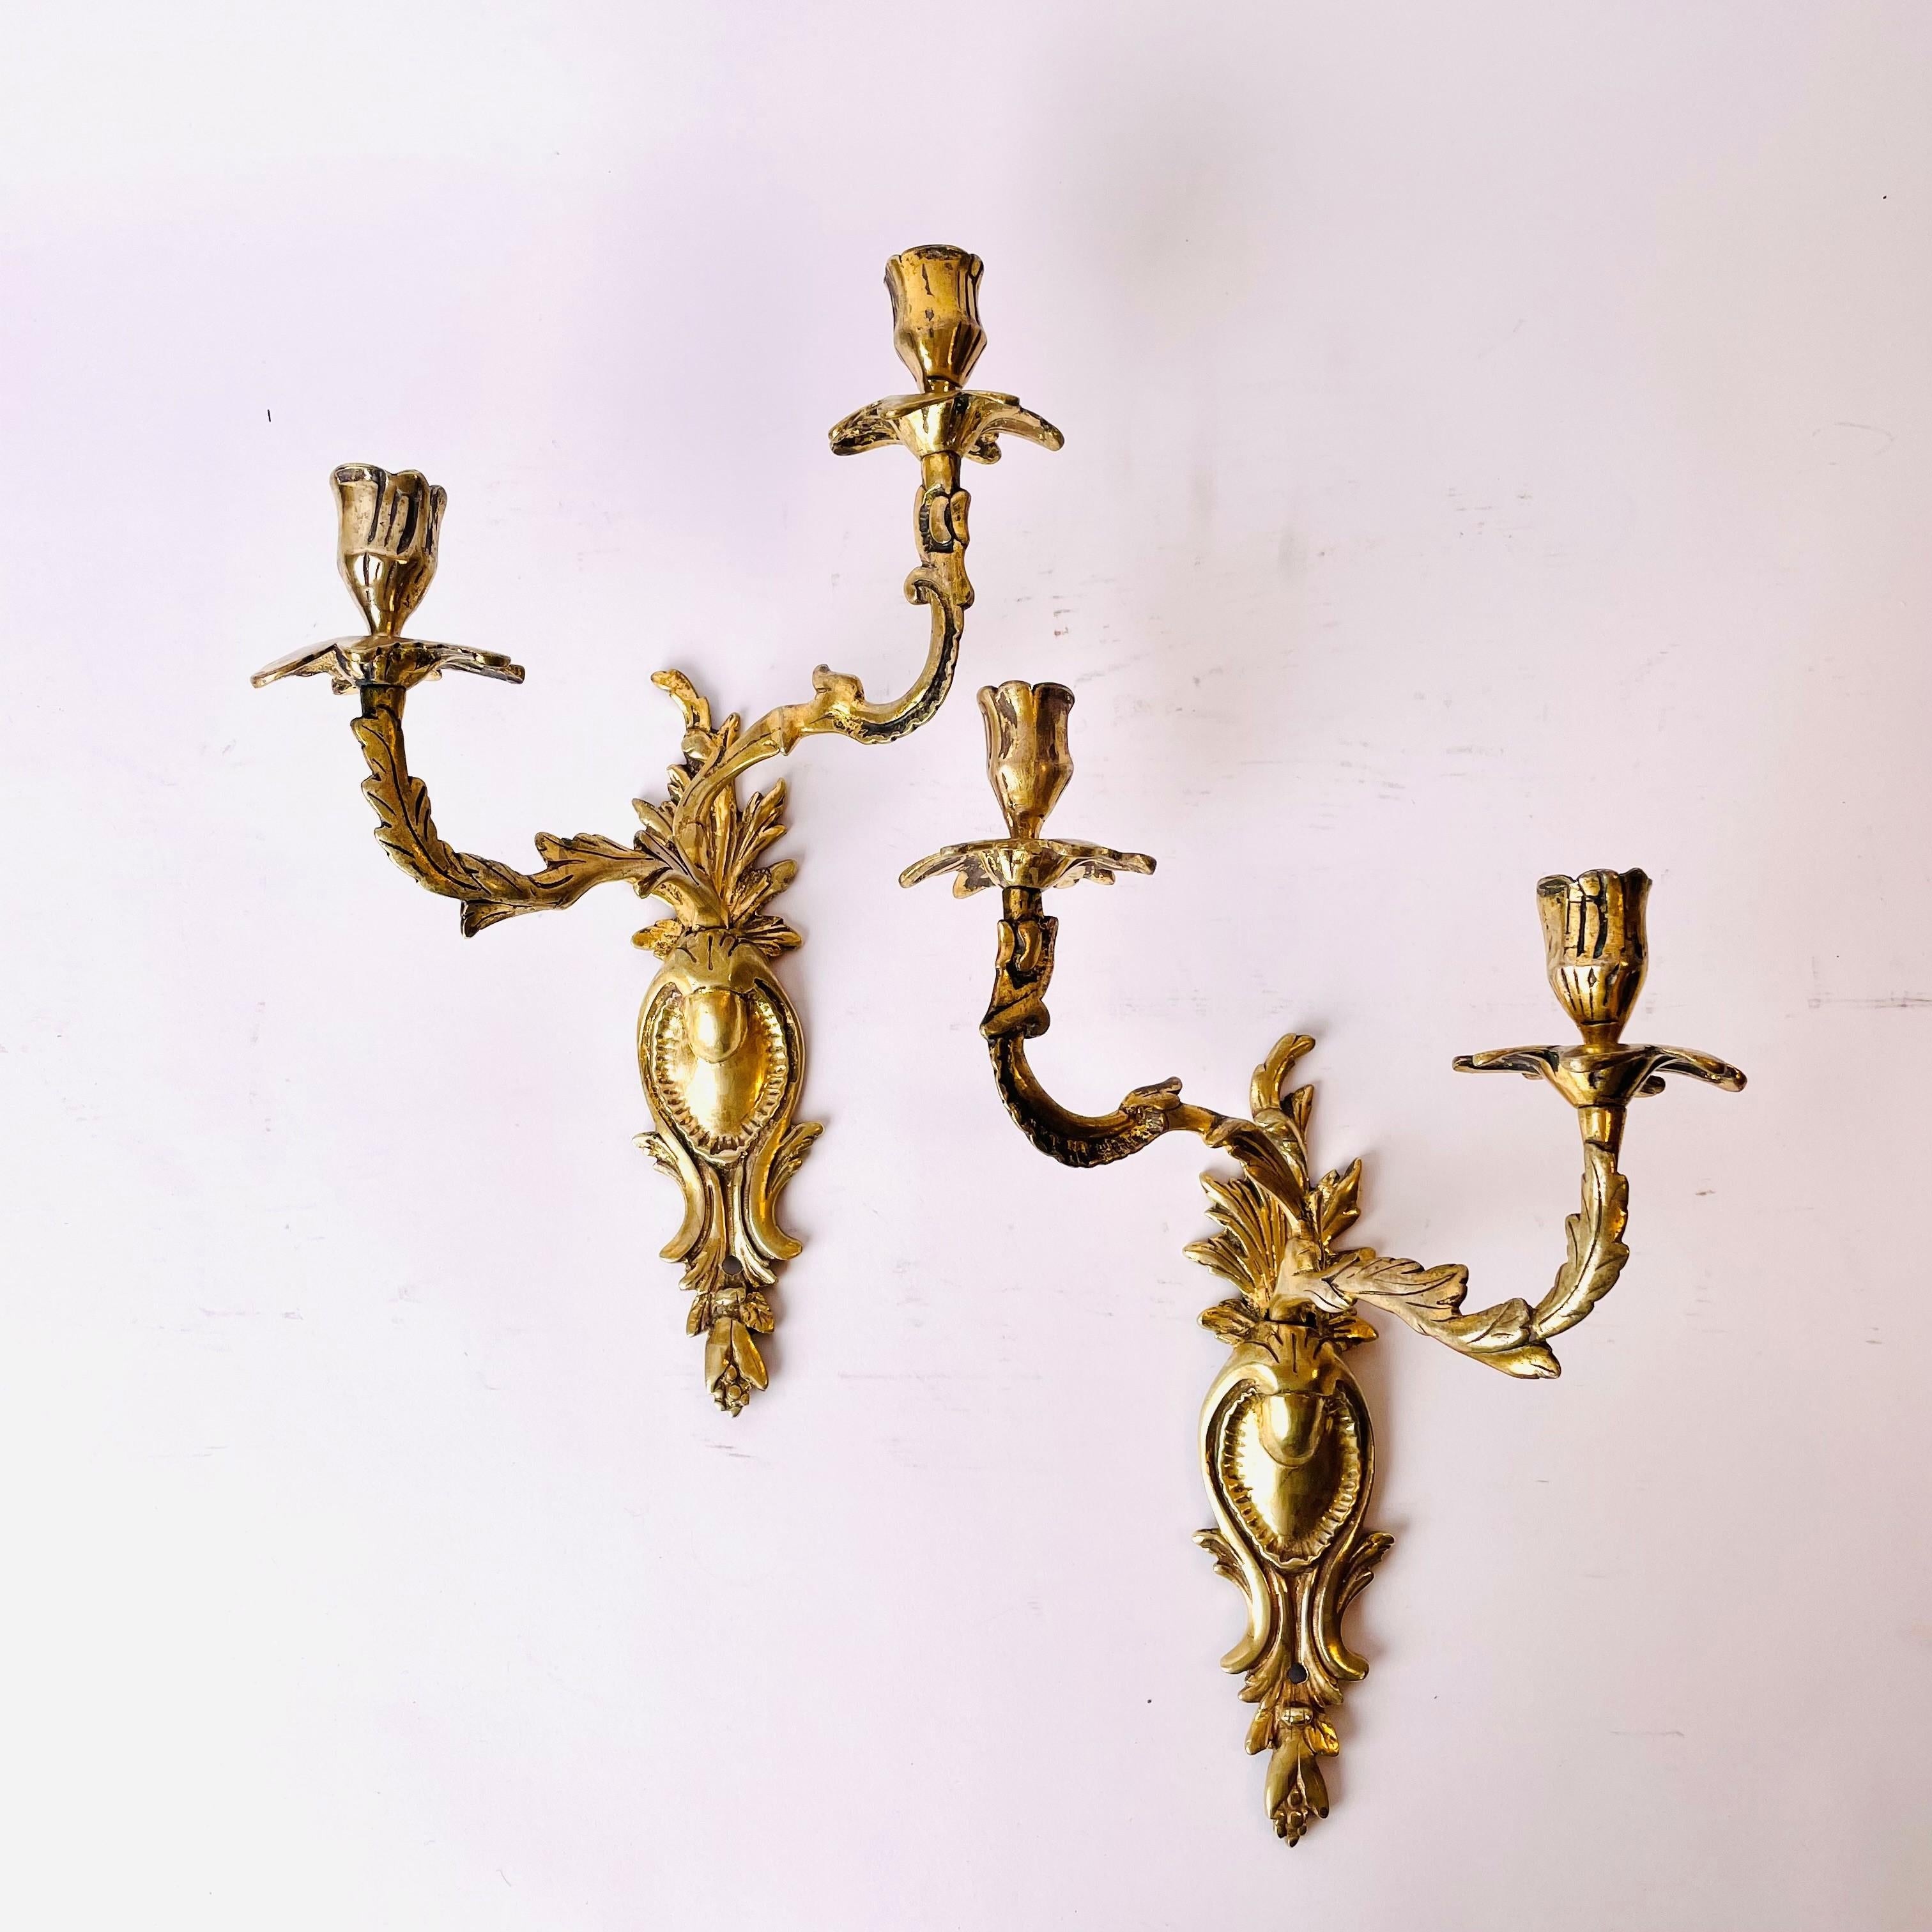 A beautiful pair of Appliques in gilt bronze, Rococo from mid-18th century.

Some wear on the original gilding (see pictures), but the overall impression of these 270 years old appliques is that they have a beautiful patina.

Wear consistent